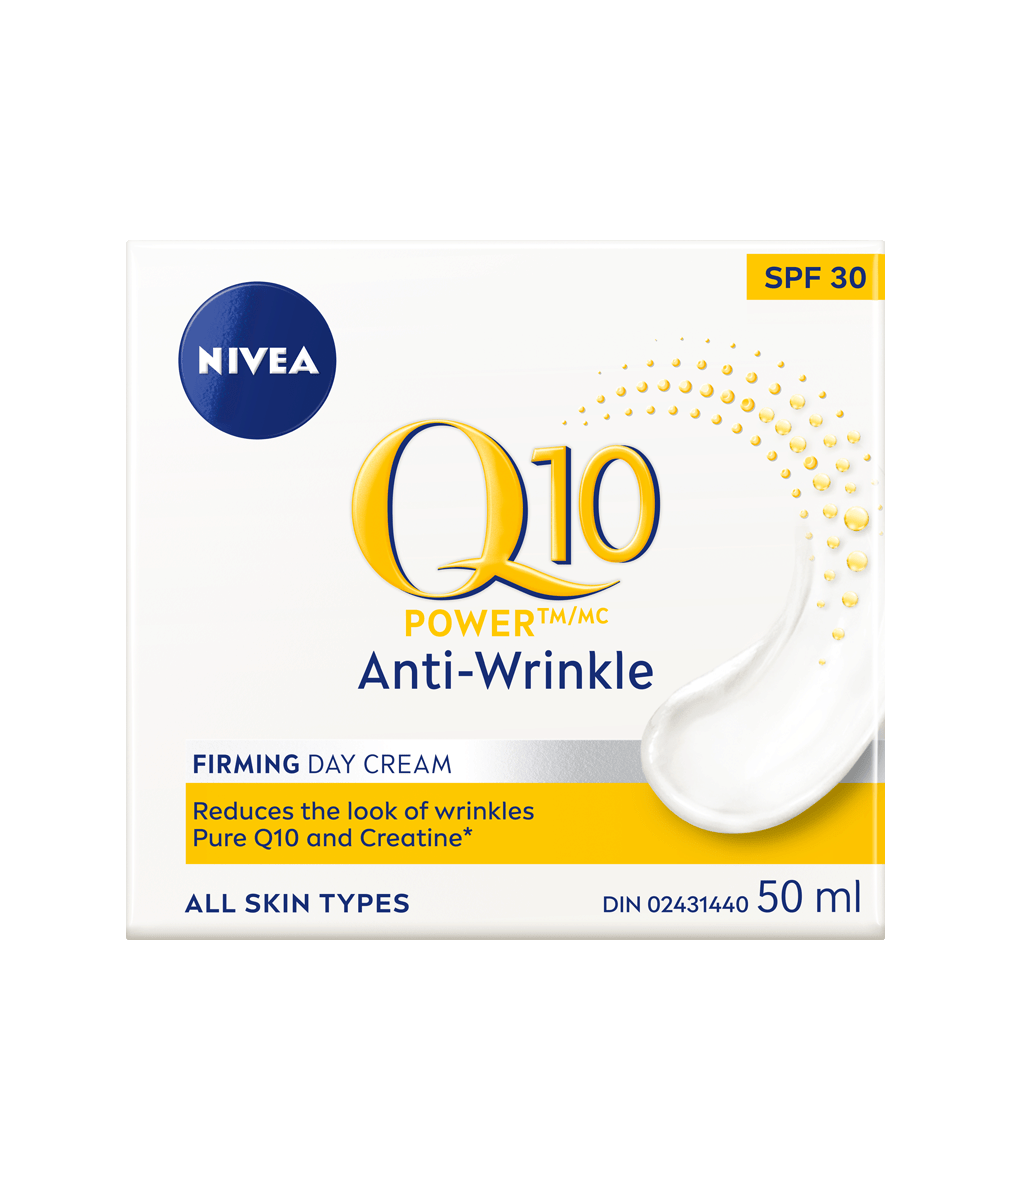 Q10 Power Anti-wrinkle firming Day Cream with SPF 30